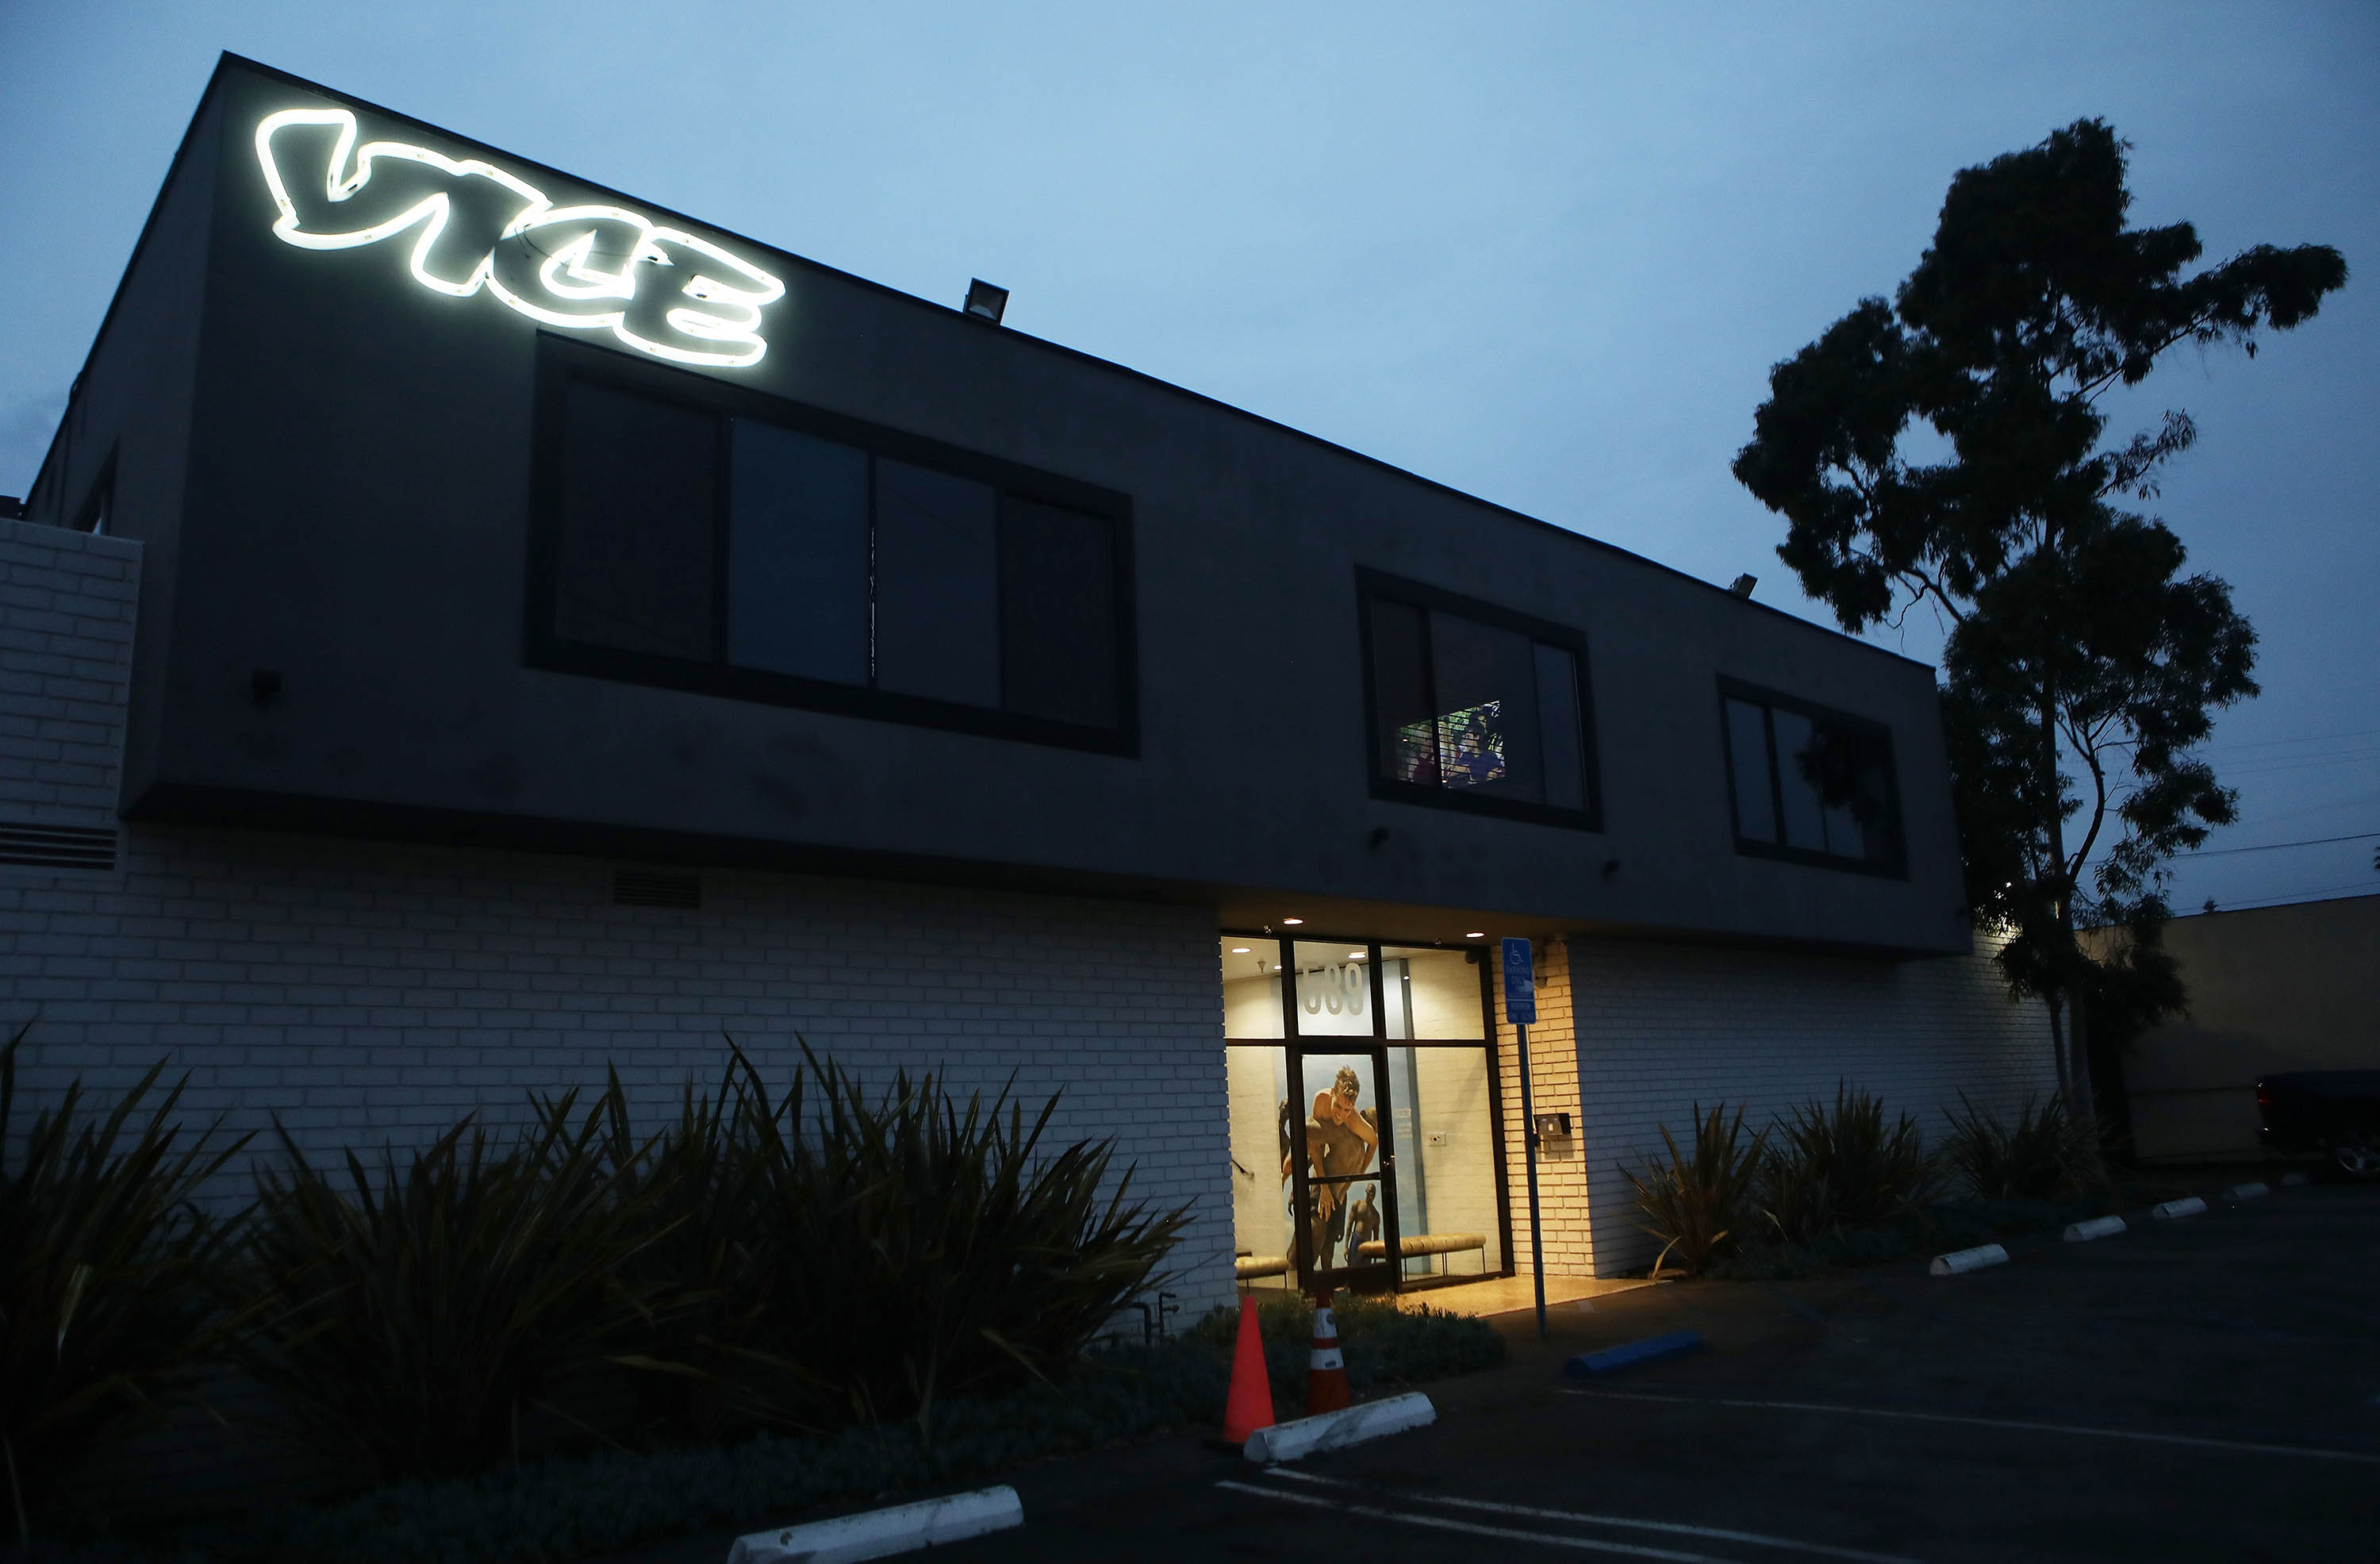 Vice Media files for Chapter 11 bankruptcy ahead of planned sale